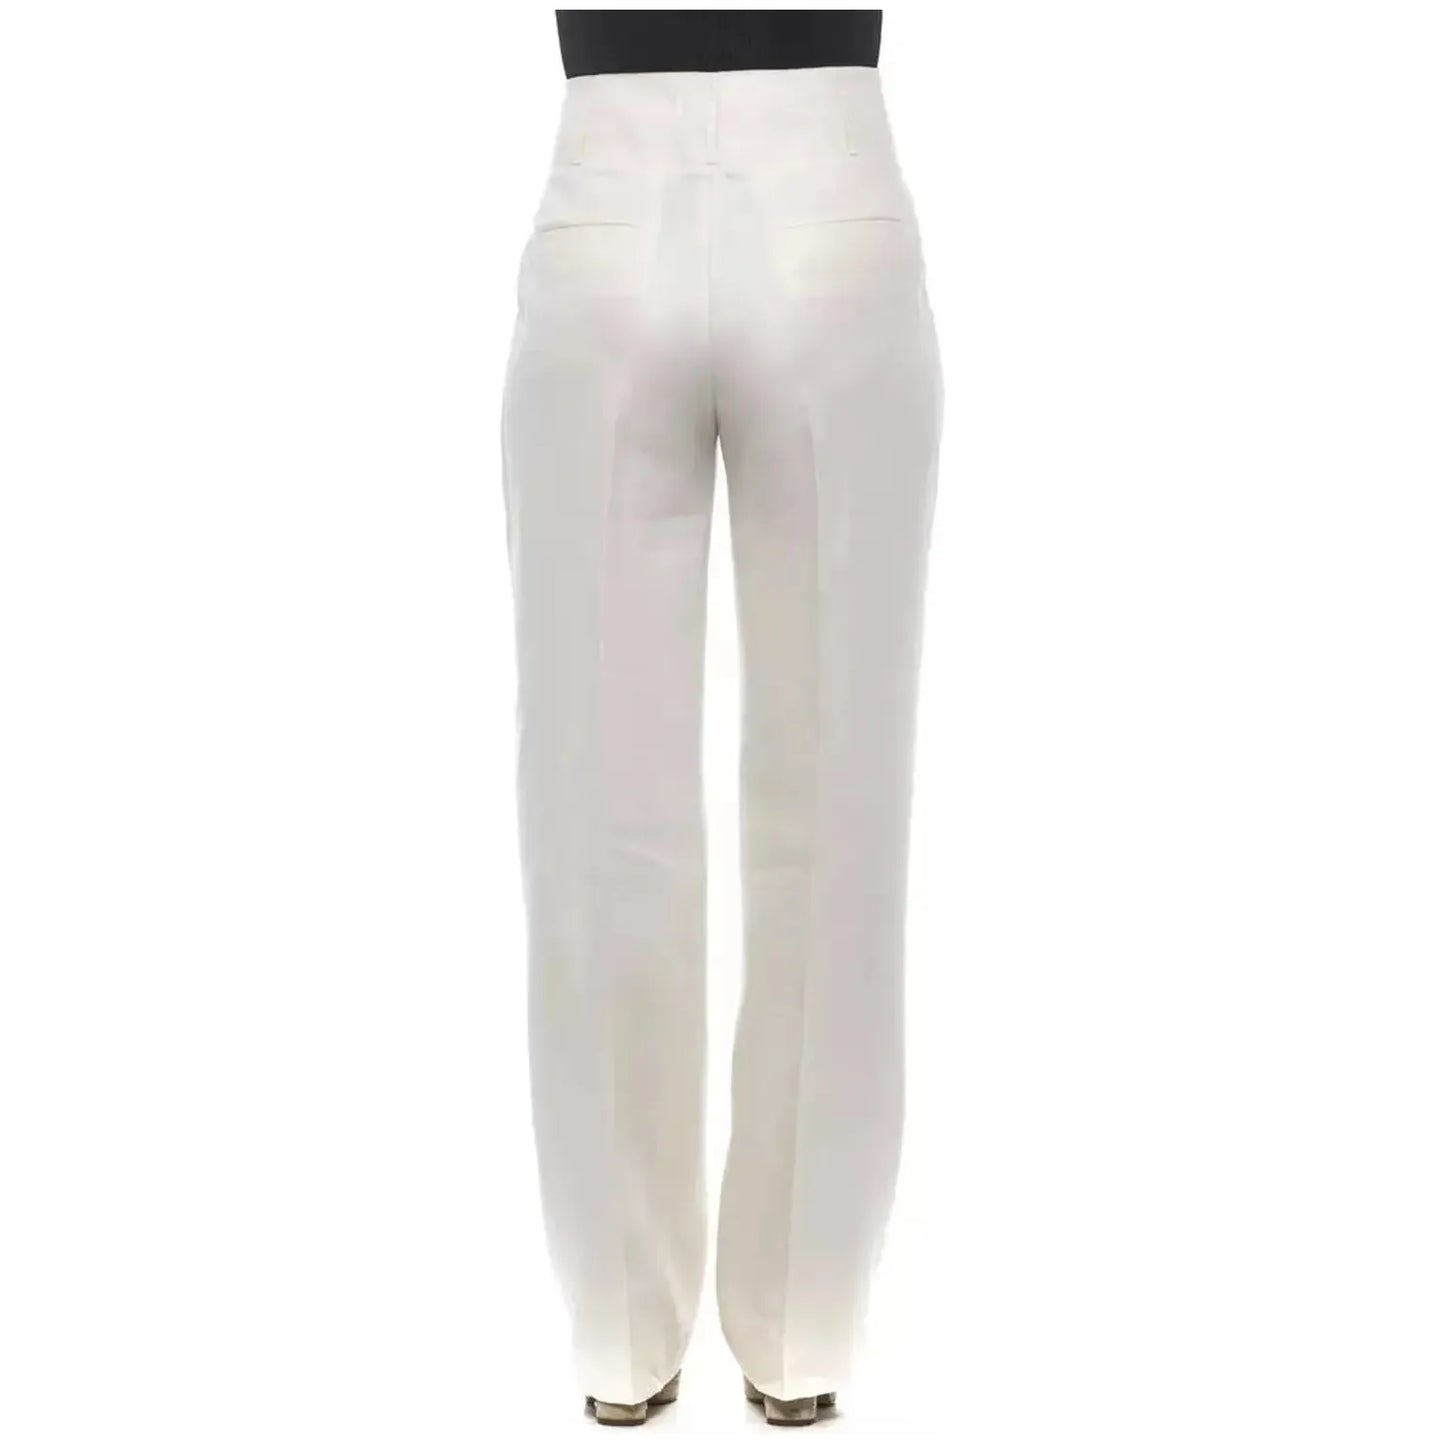 Peserico Elegant High-Waisted Flax Palazzo Pants beige-white-flax-jeans-pants stock_product_image_21257_1094310633-19-50cd73b1-f15.webp